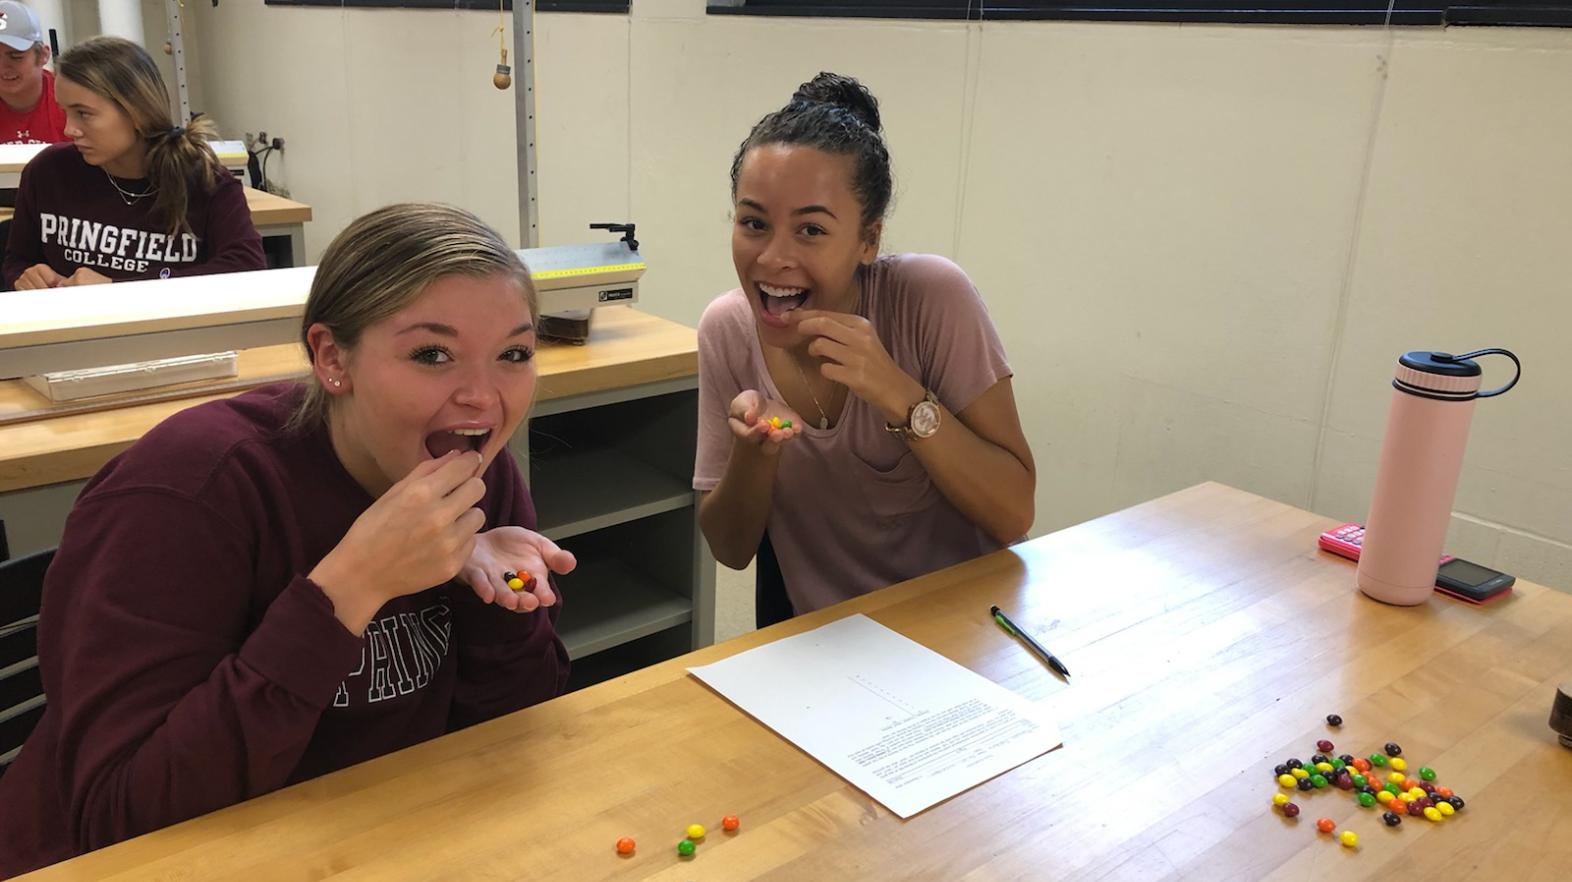 Two female students pretend to eat skittles during a math assignment